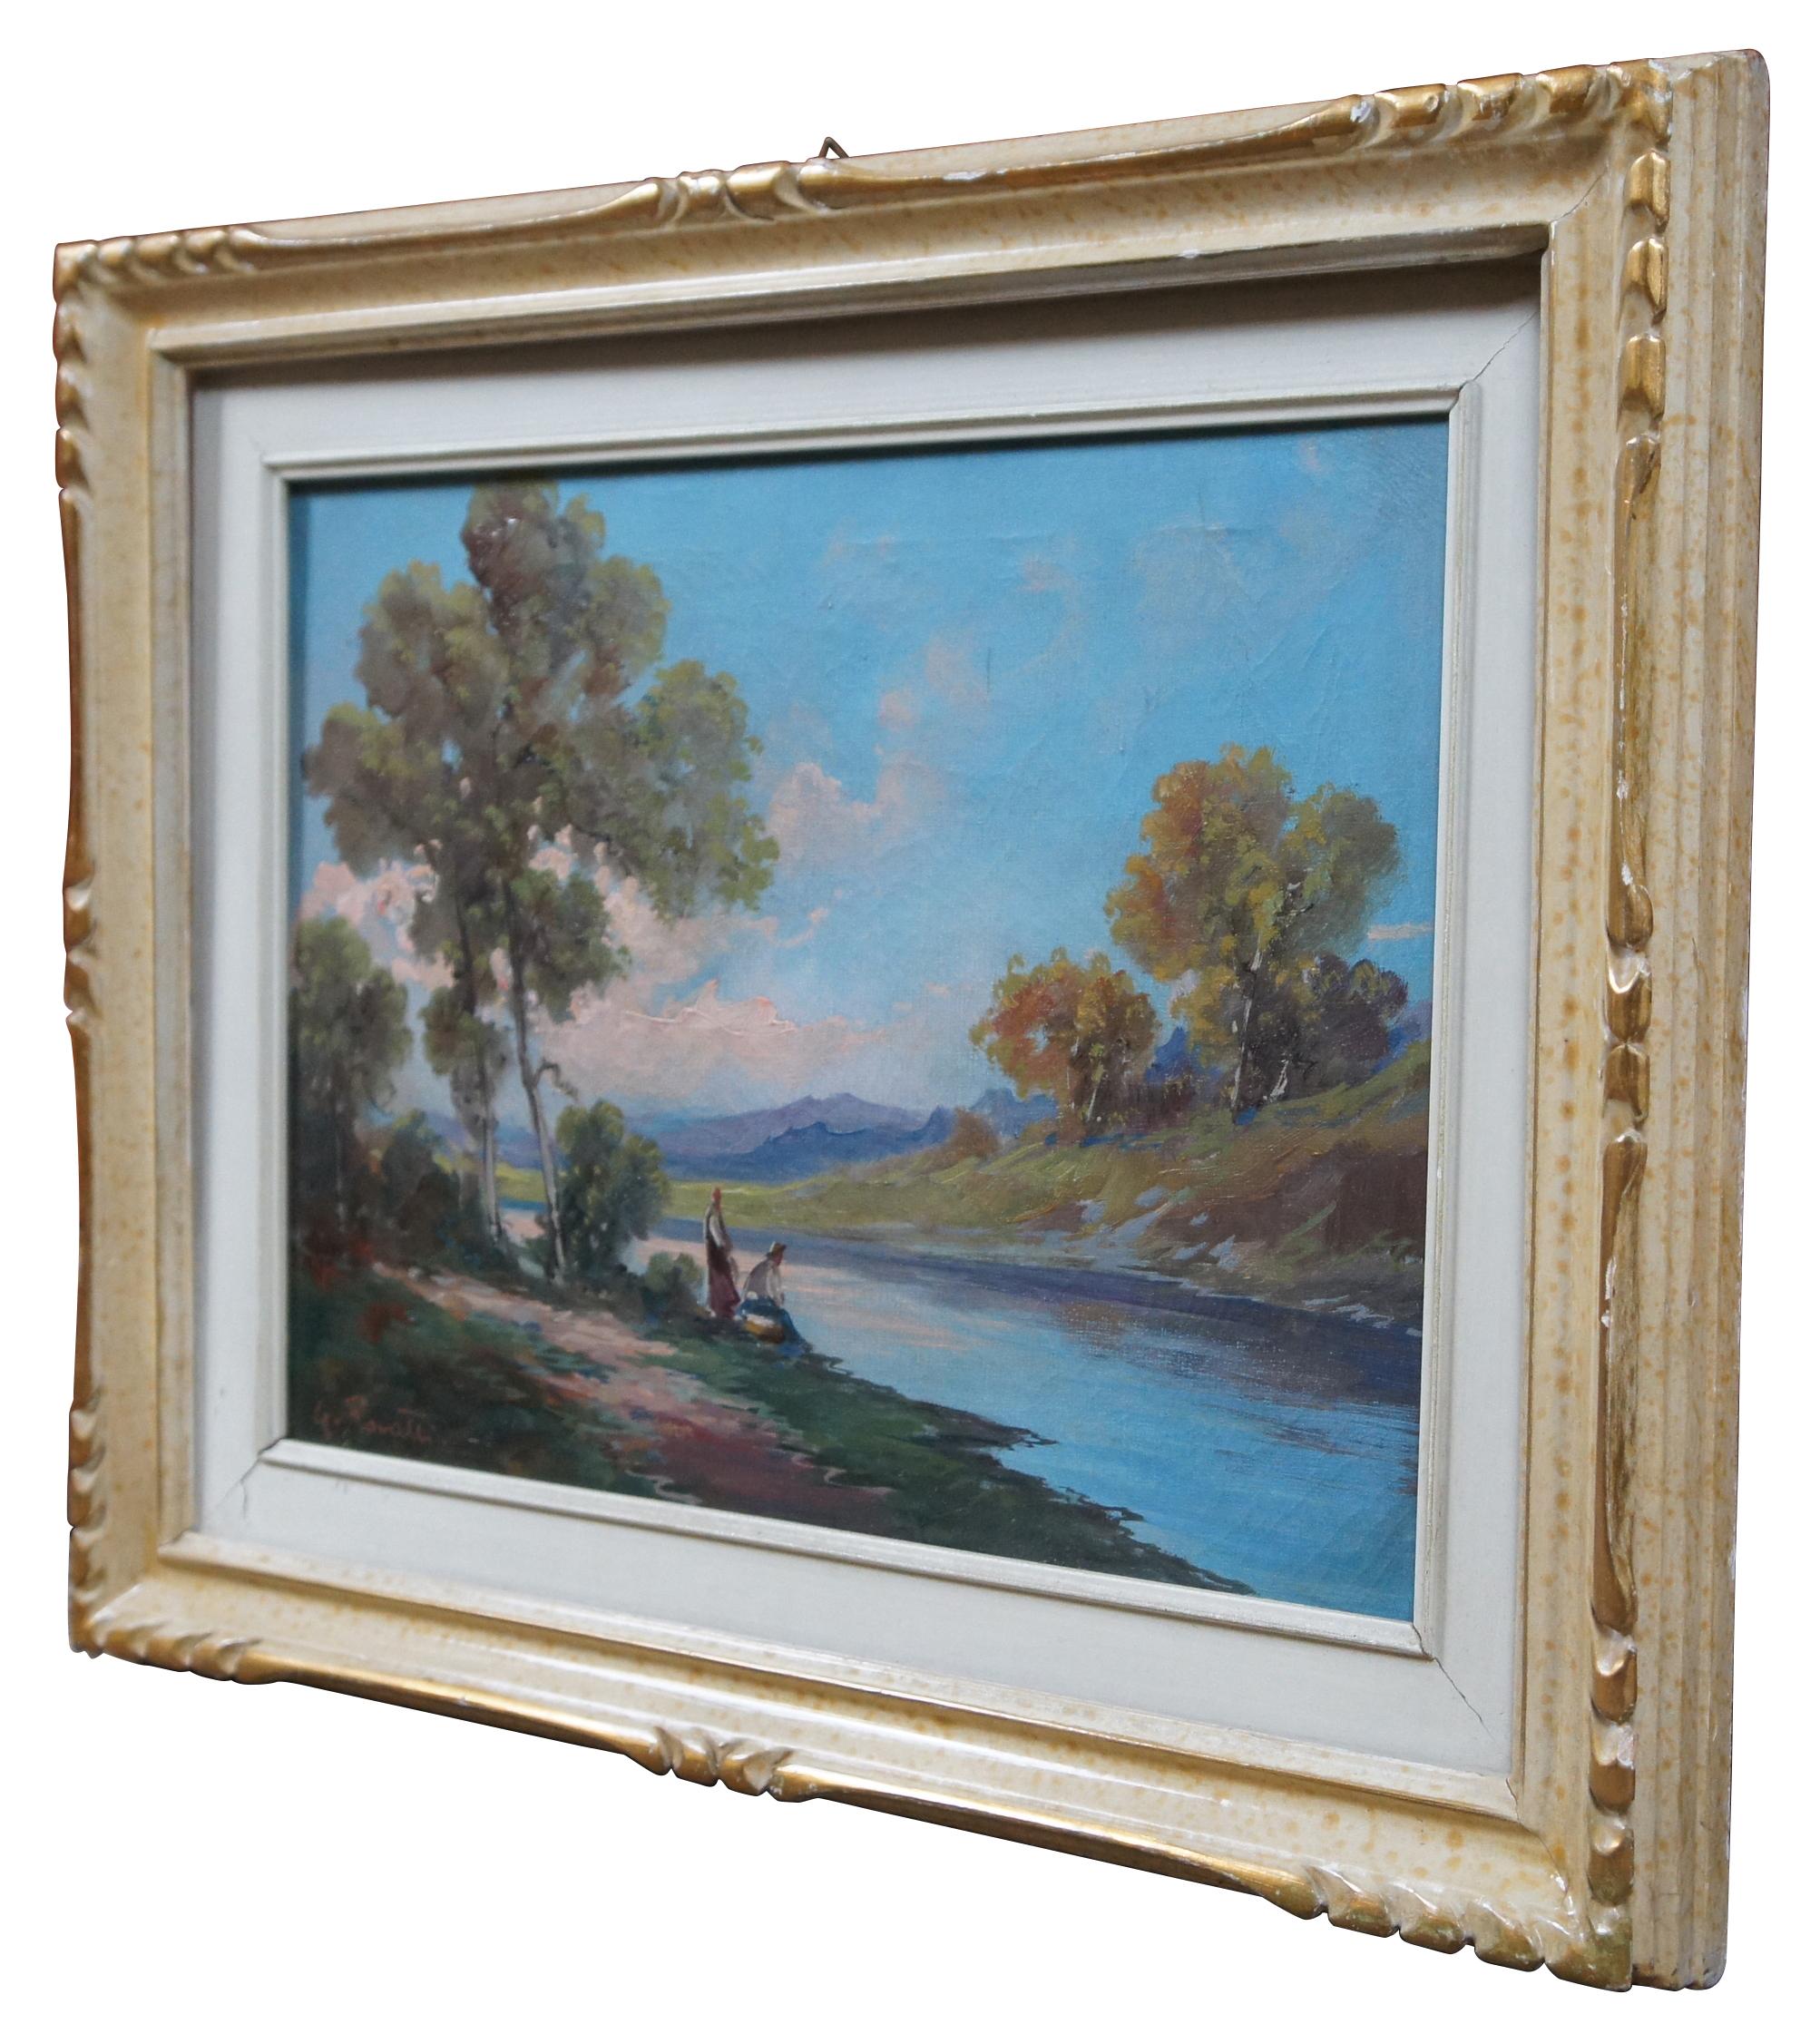 Mid century oil on canvas landscape painting showing a tree lined river with two figures washing linens. Signed in the lower left G. Rovatti.

Measures: 21” x 1.75” x 17” / Sans frame - 15.25” x 11.25” (width x depth x height).
 